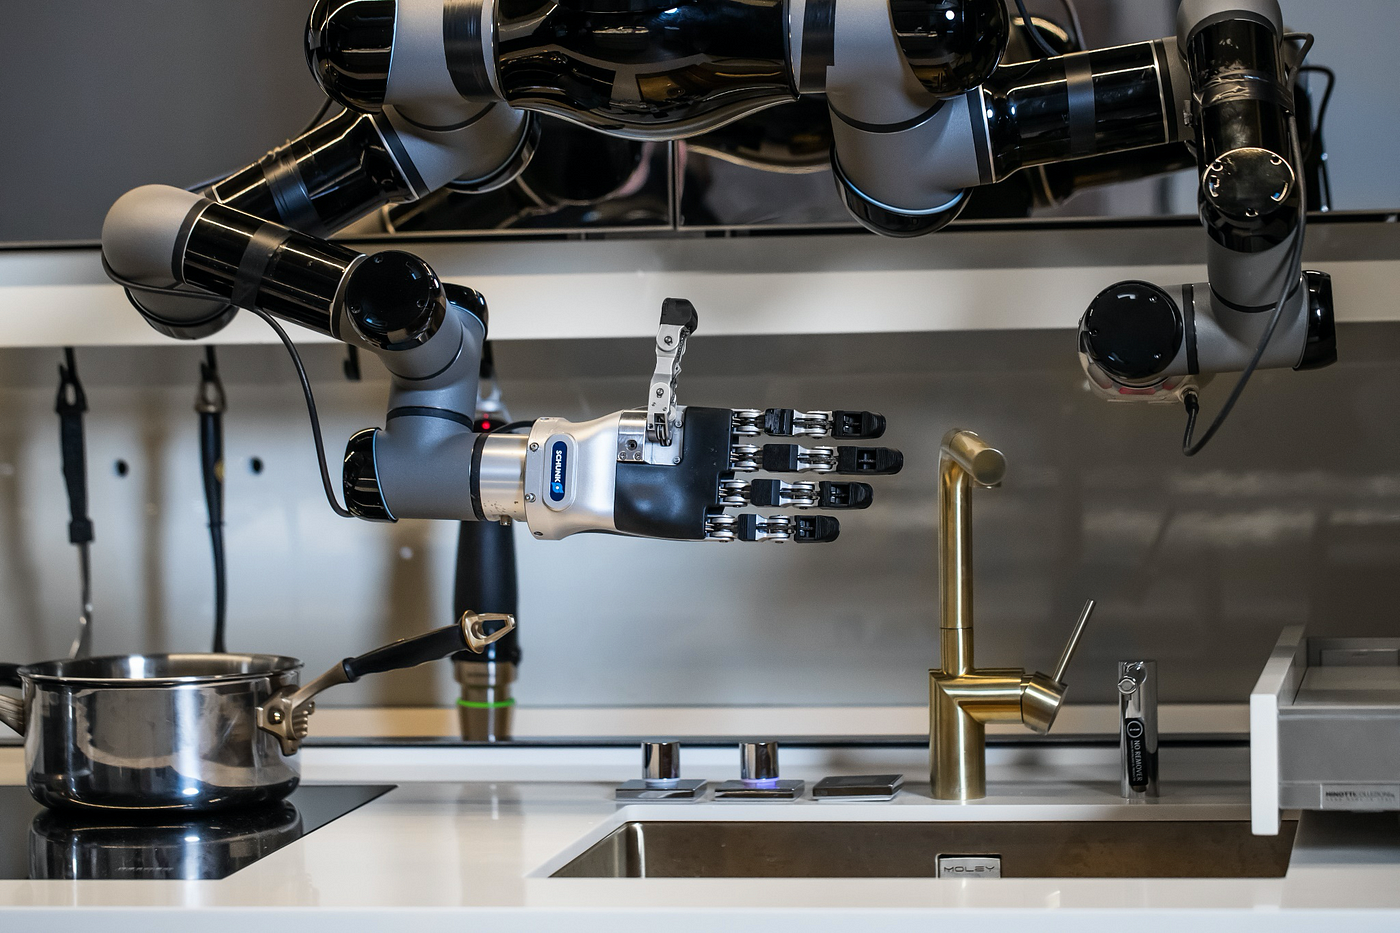 Moley Robotic kitchen has launched: The most detailed overview of its  innovative technology | by Moley Robotics | Medium